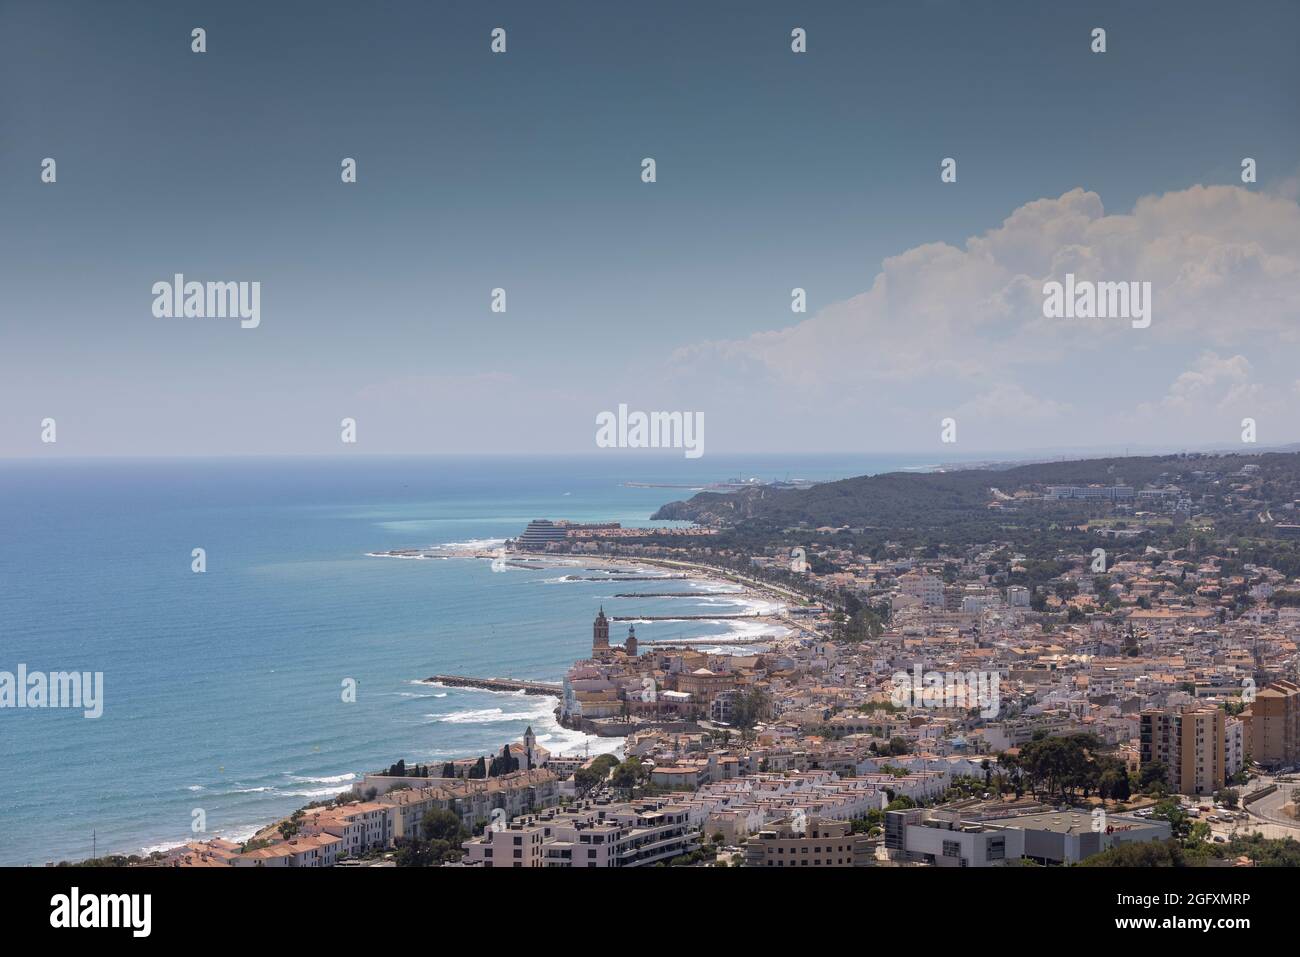 Coastline showing town of sitges, near Barcelona, Spain Stock Photo